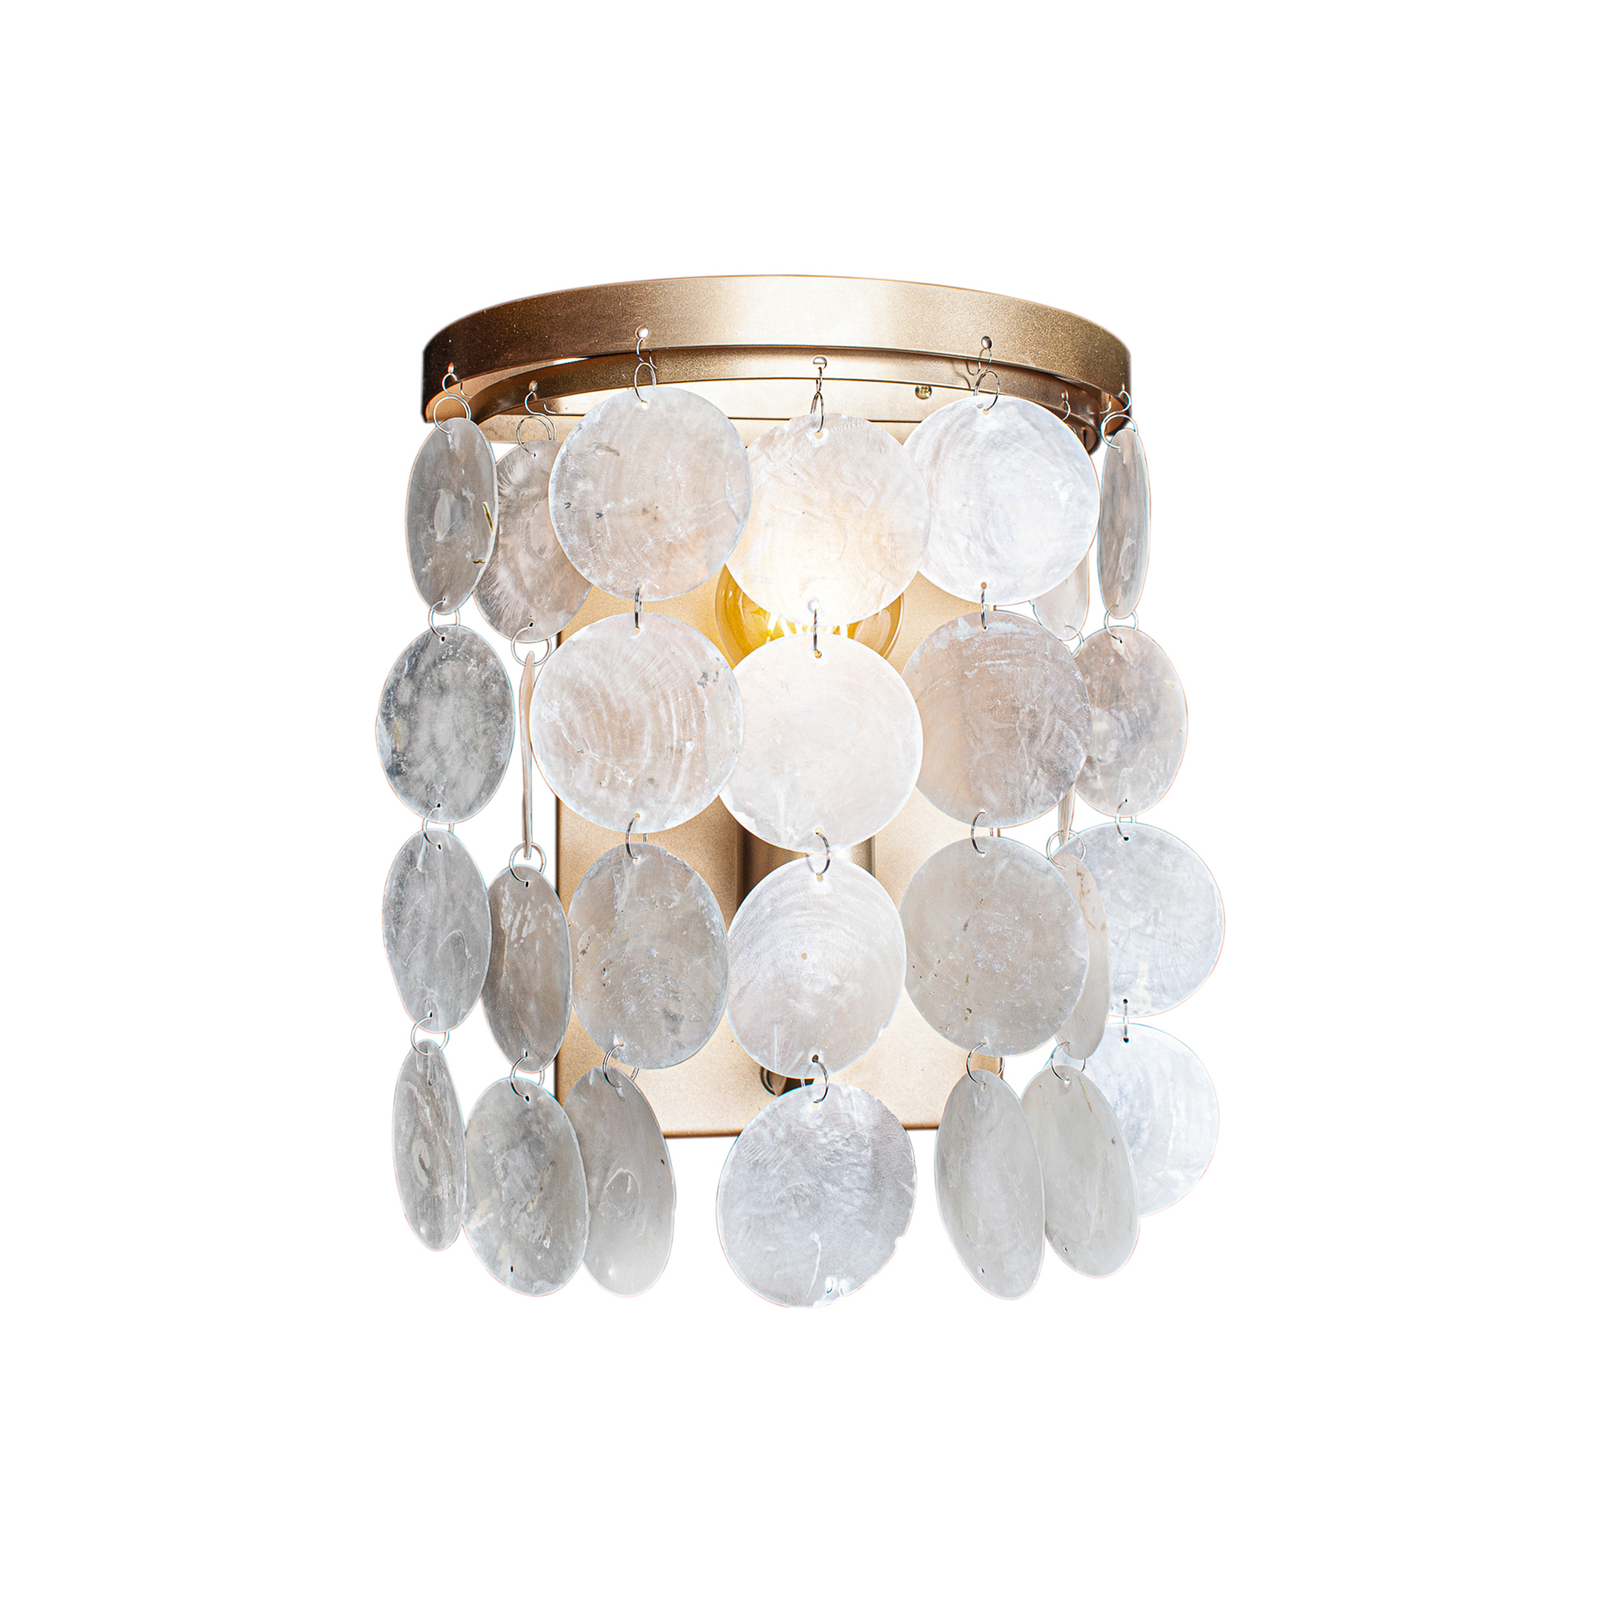 By Rydéns Diana wall light with shells